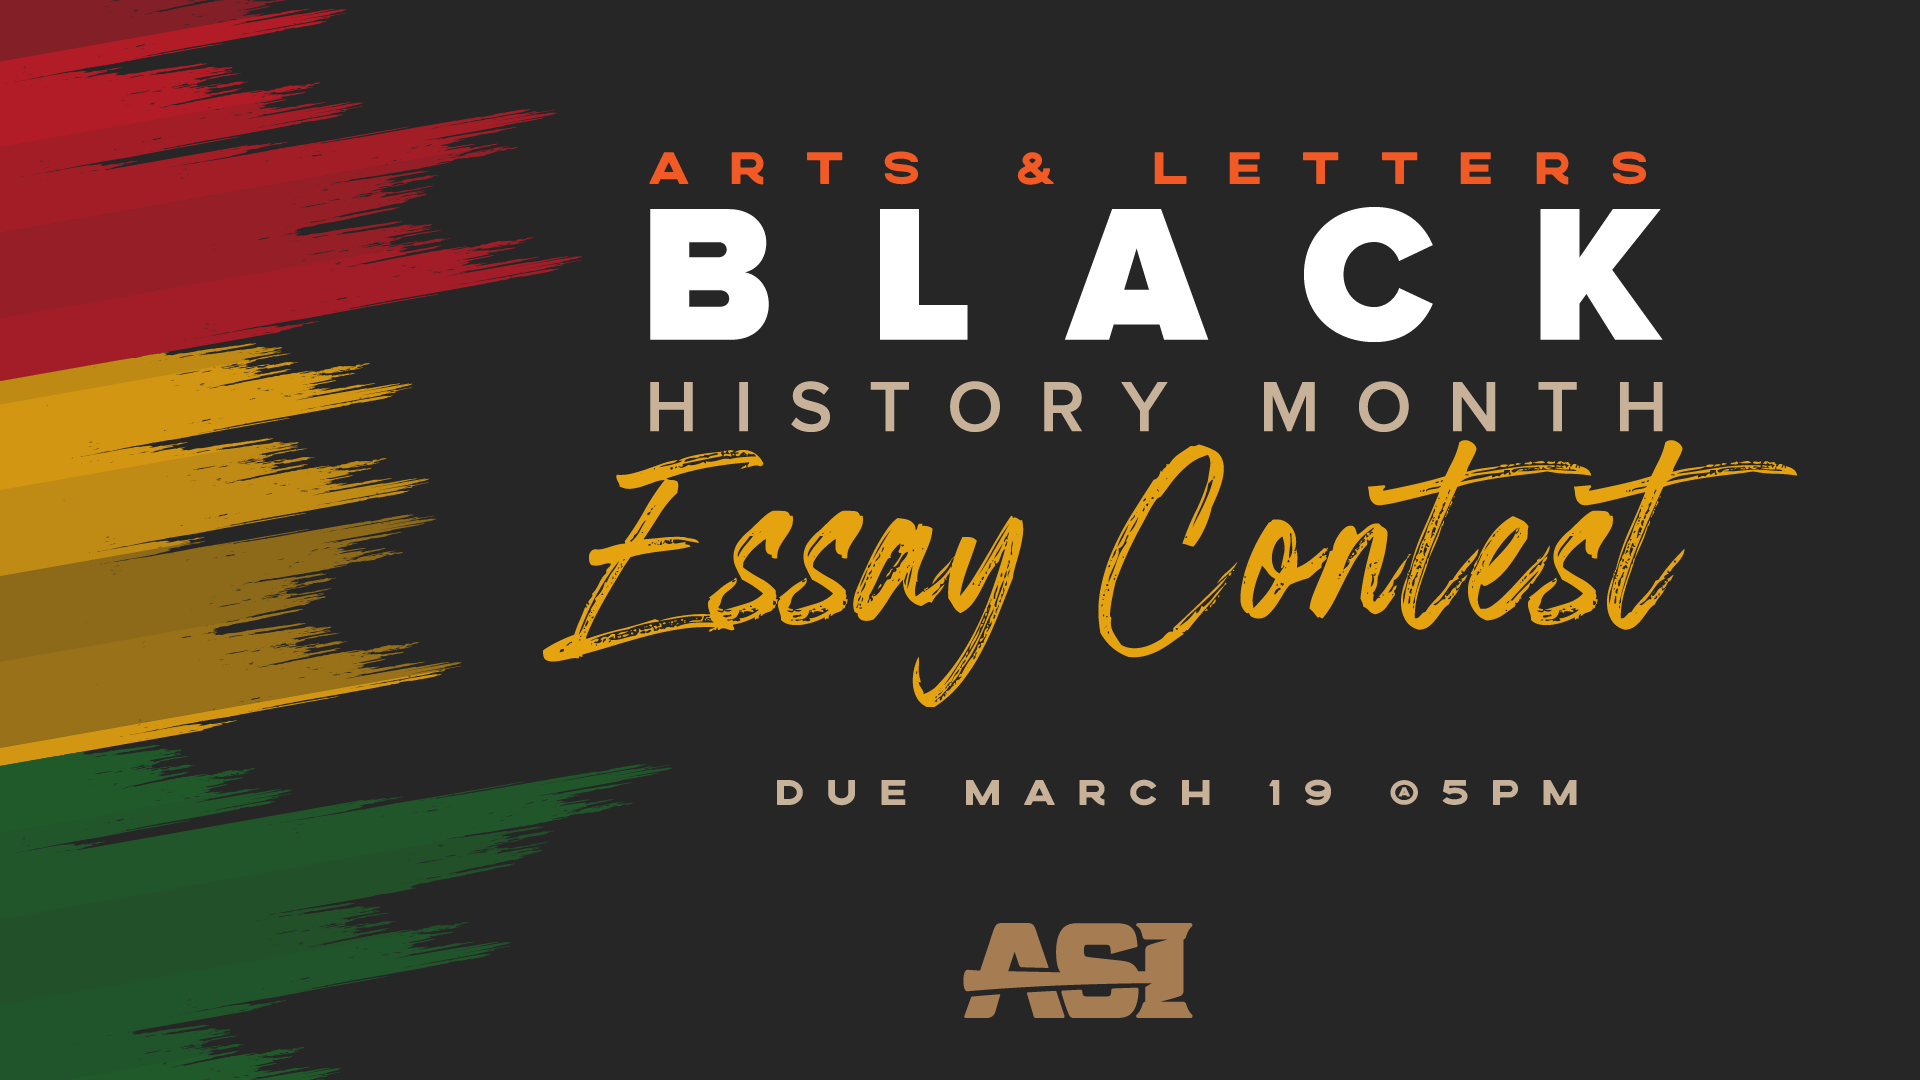 black history month essay research